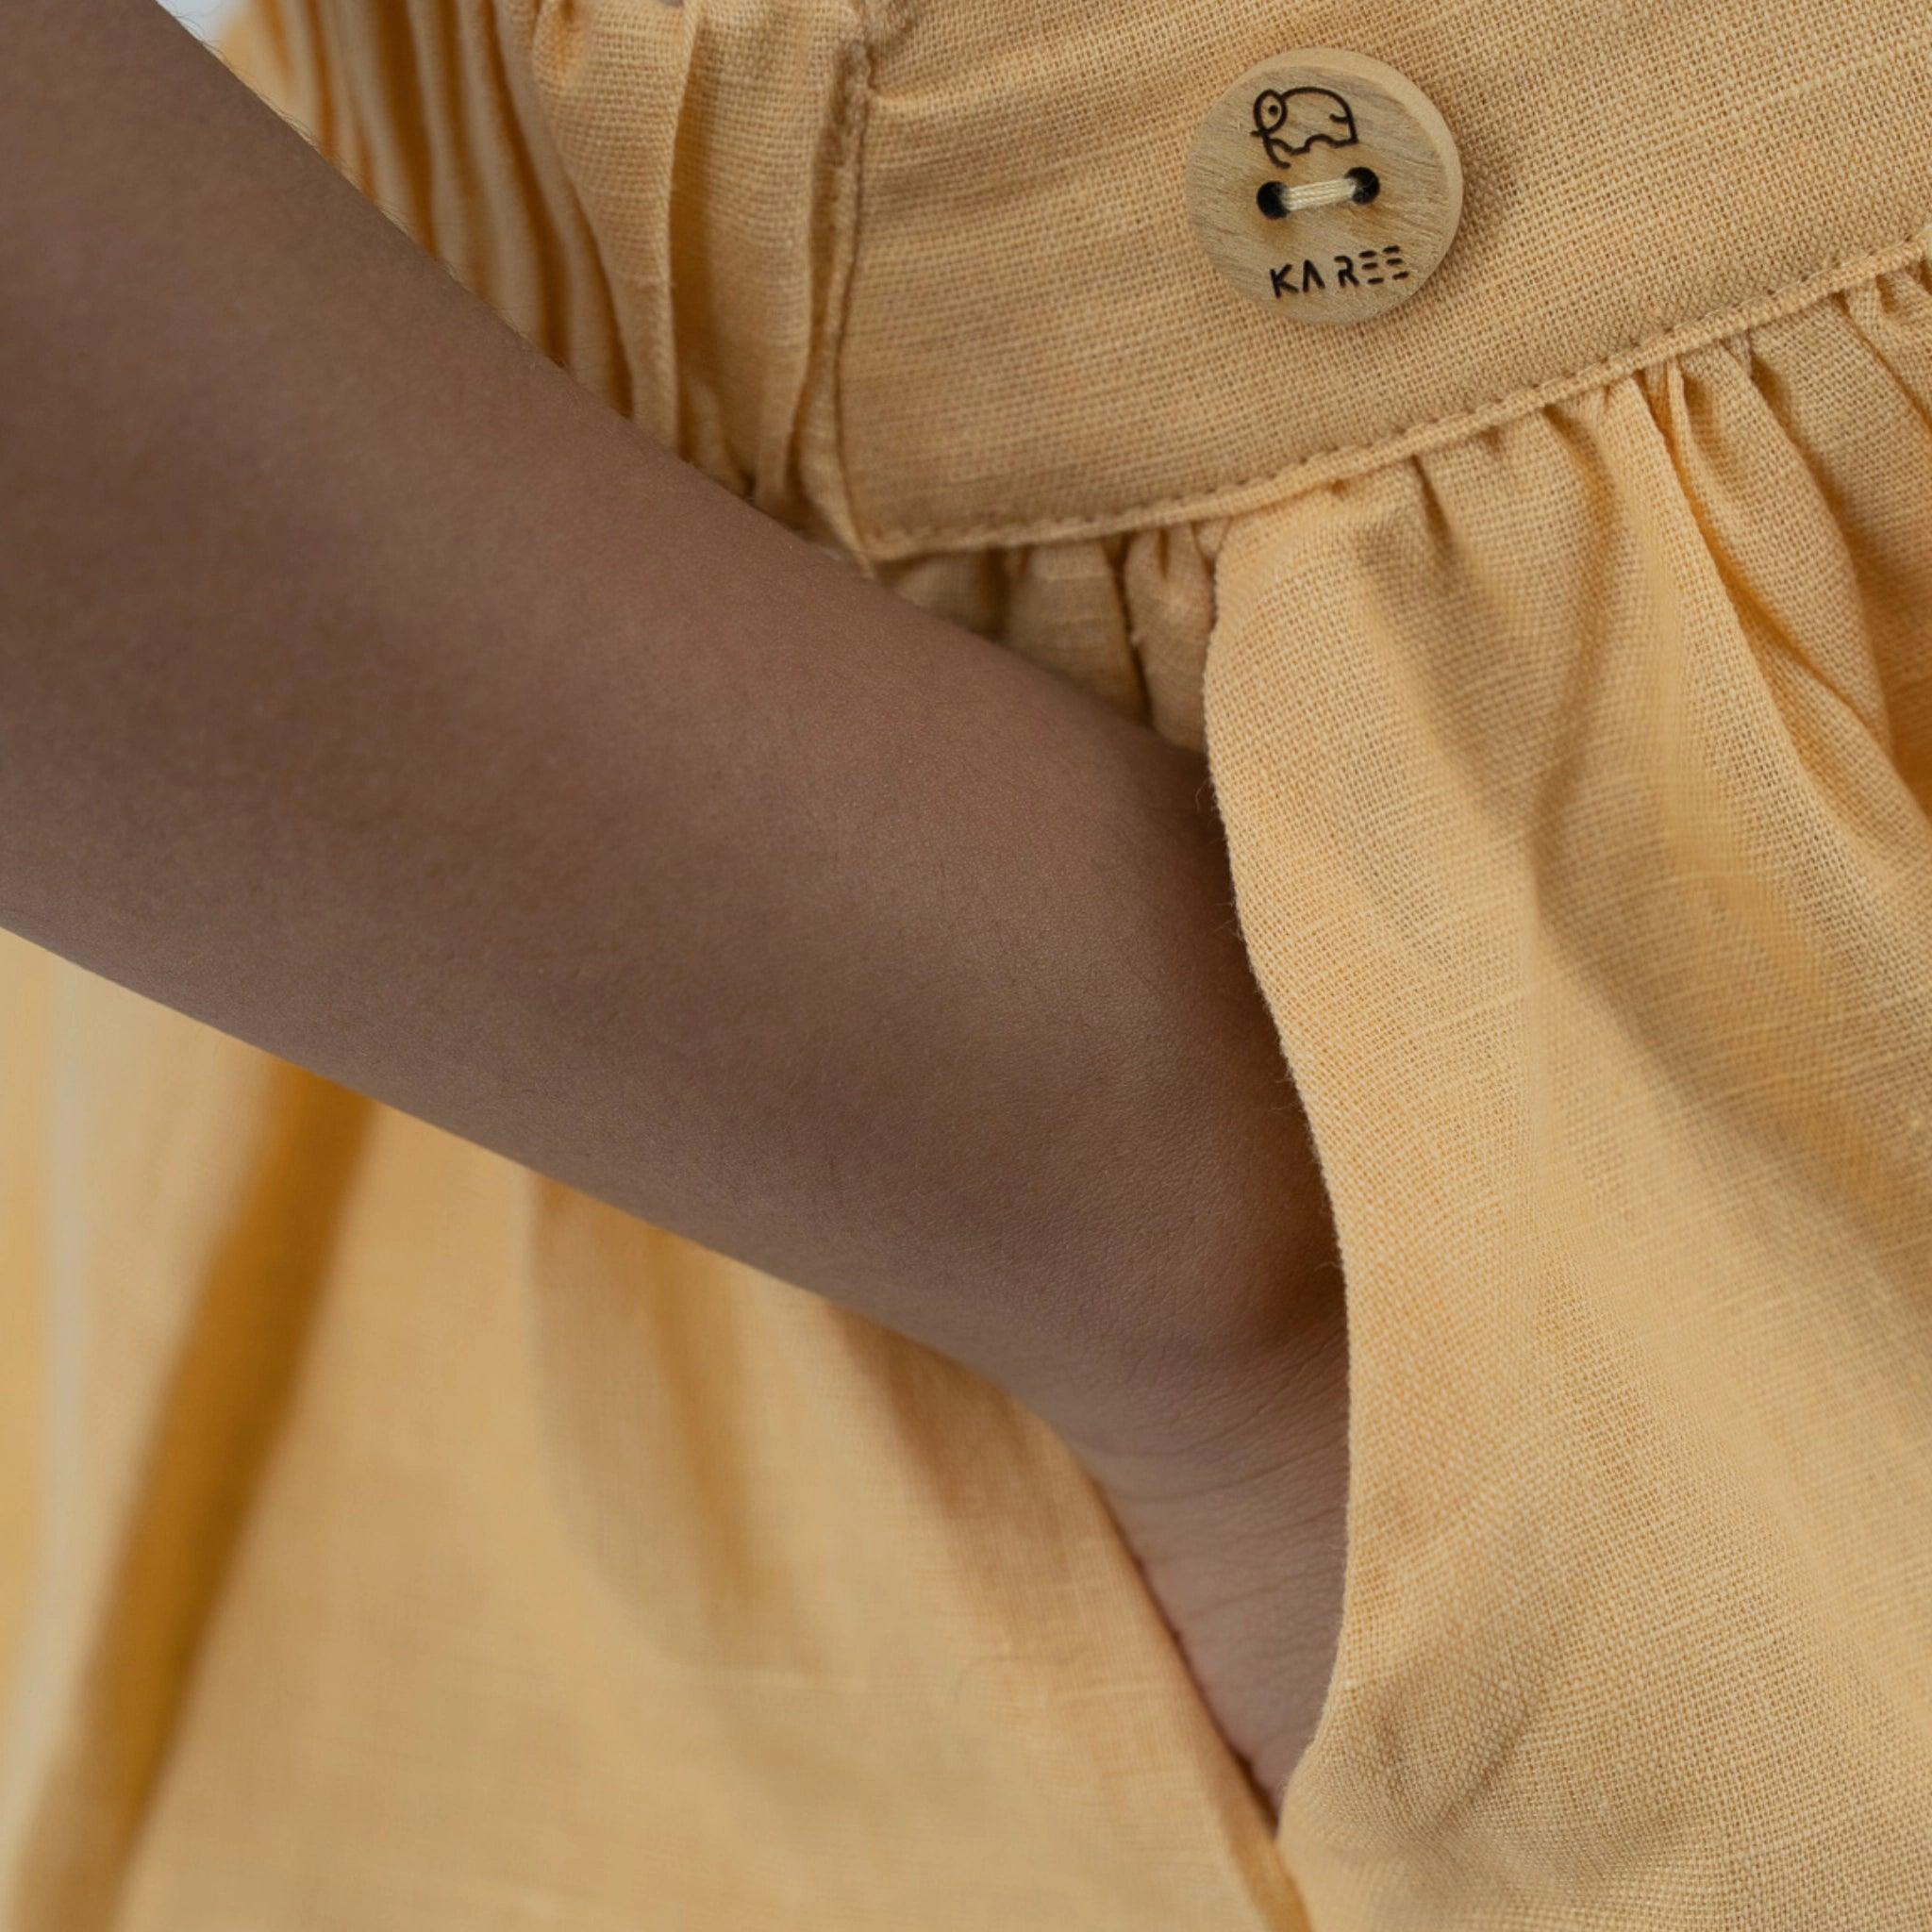 Close-up of a person wearing a yellow Karee Golden Fleece Linen Pinafore dress with a wooden button labeled "kare" at the pocket.